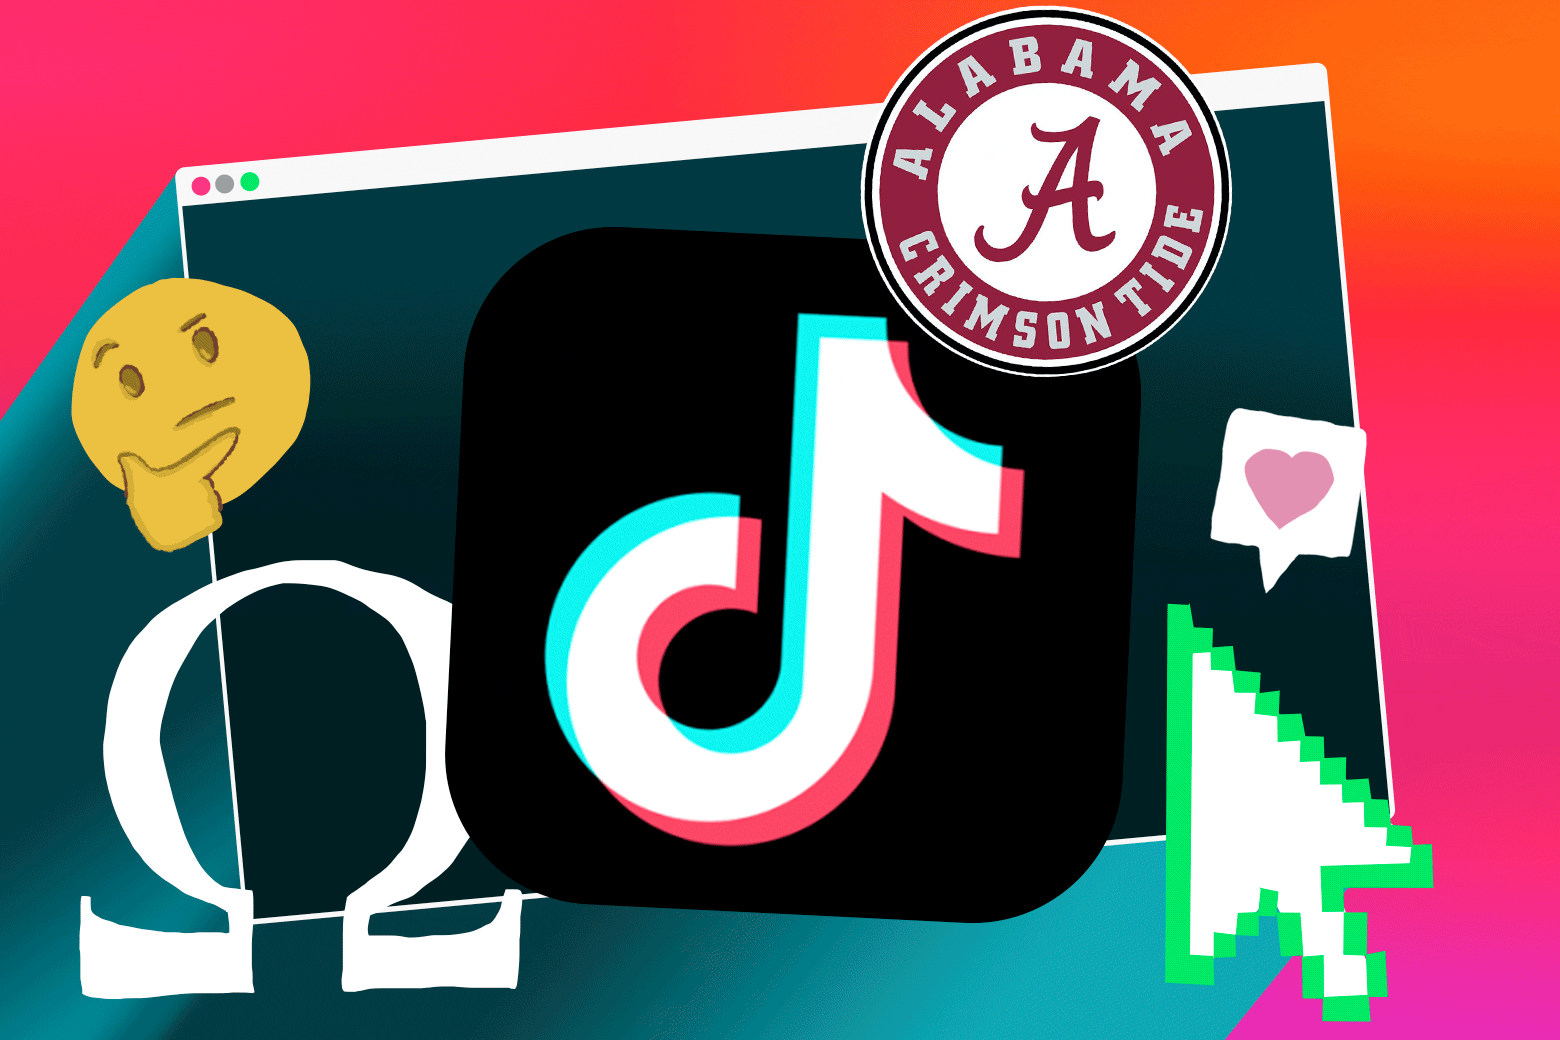 The black, red, blue, and white TikTok logo surrounded by an Omega symbol and the University of Alabama's red-and-white logo with an A on it.